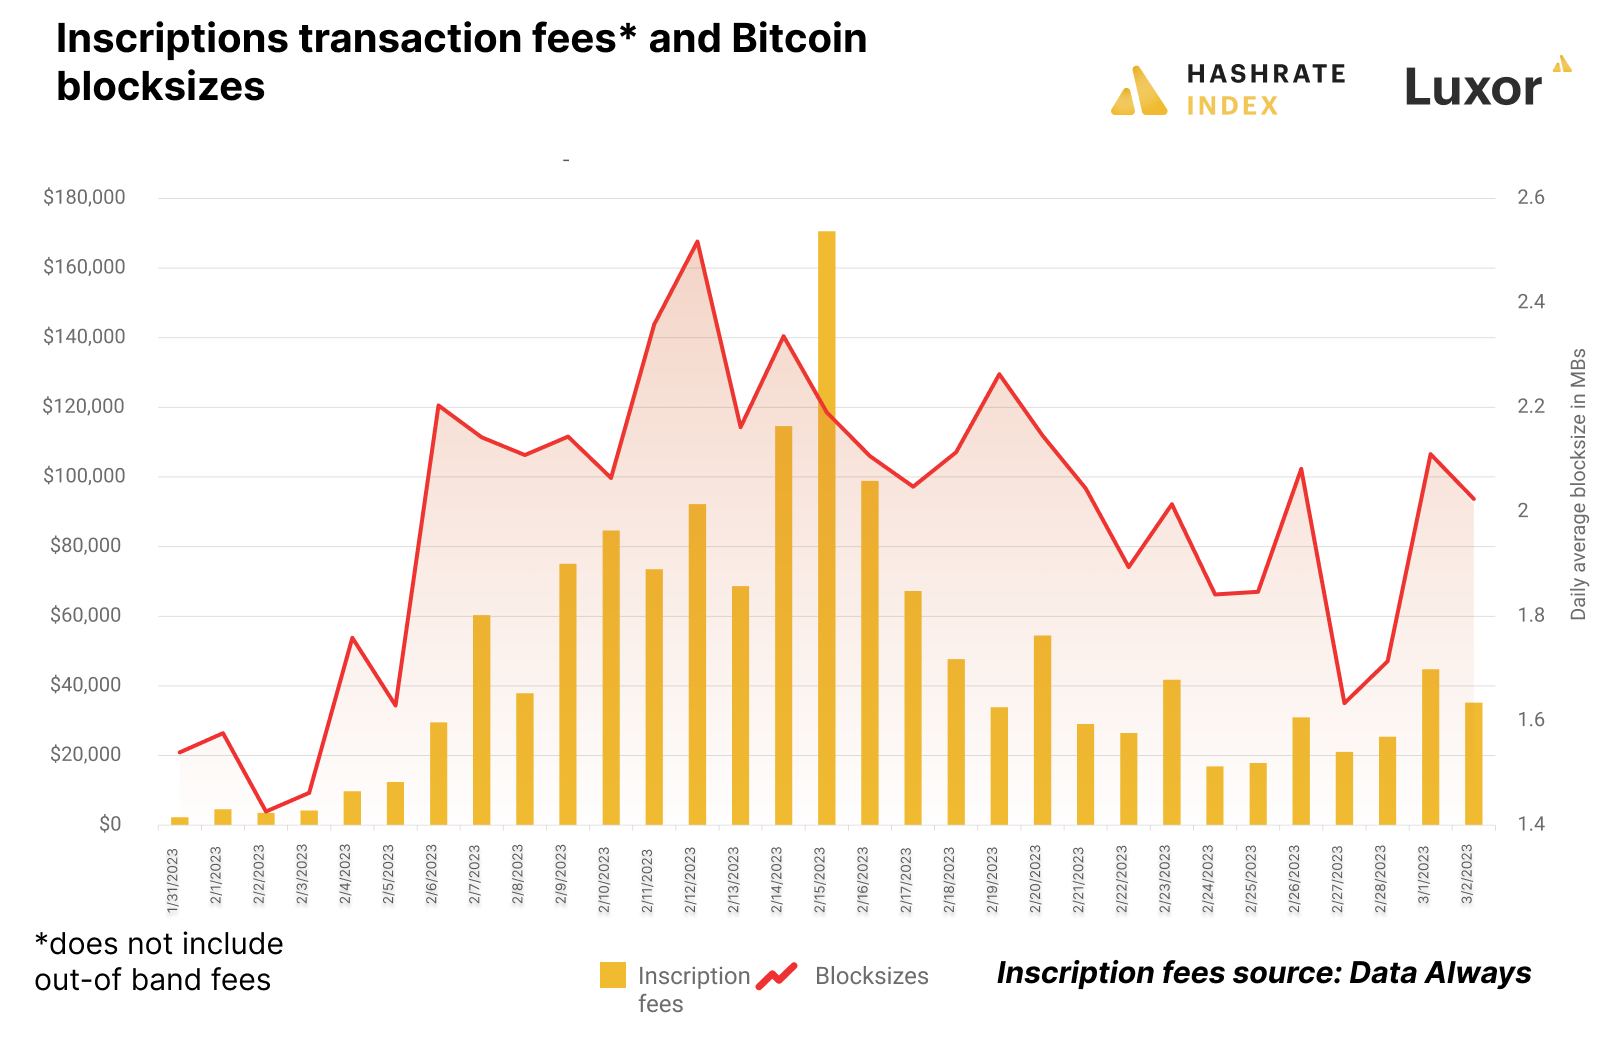 Inscription fees and Bitcoin blocksizes | Source: Data Always, Hashrate Index